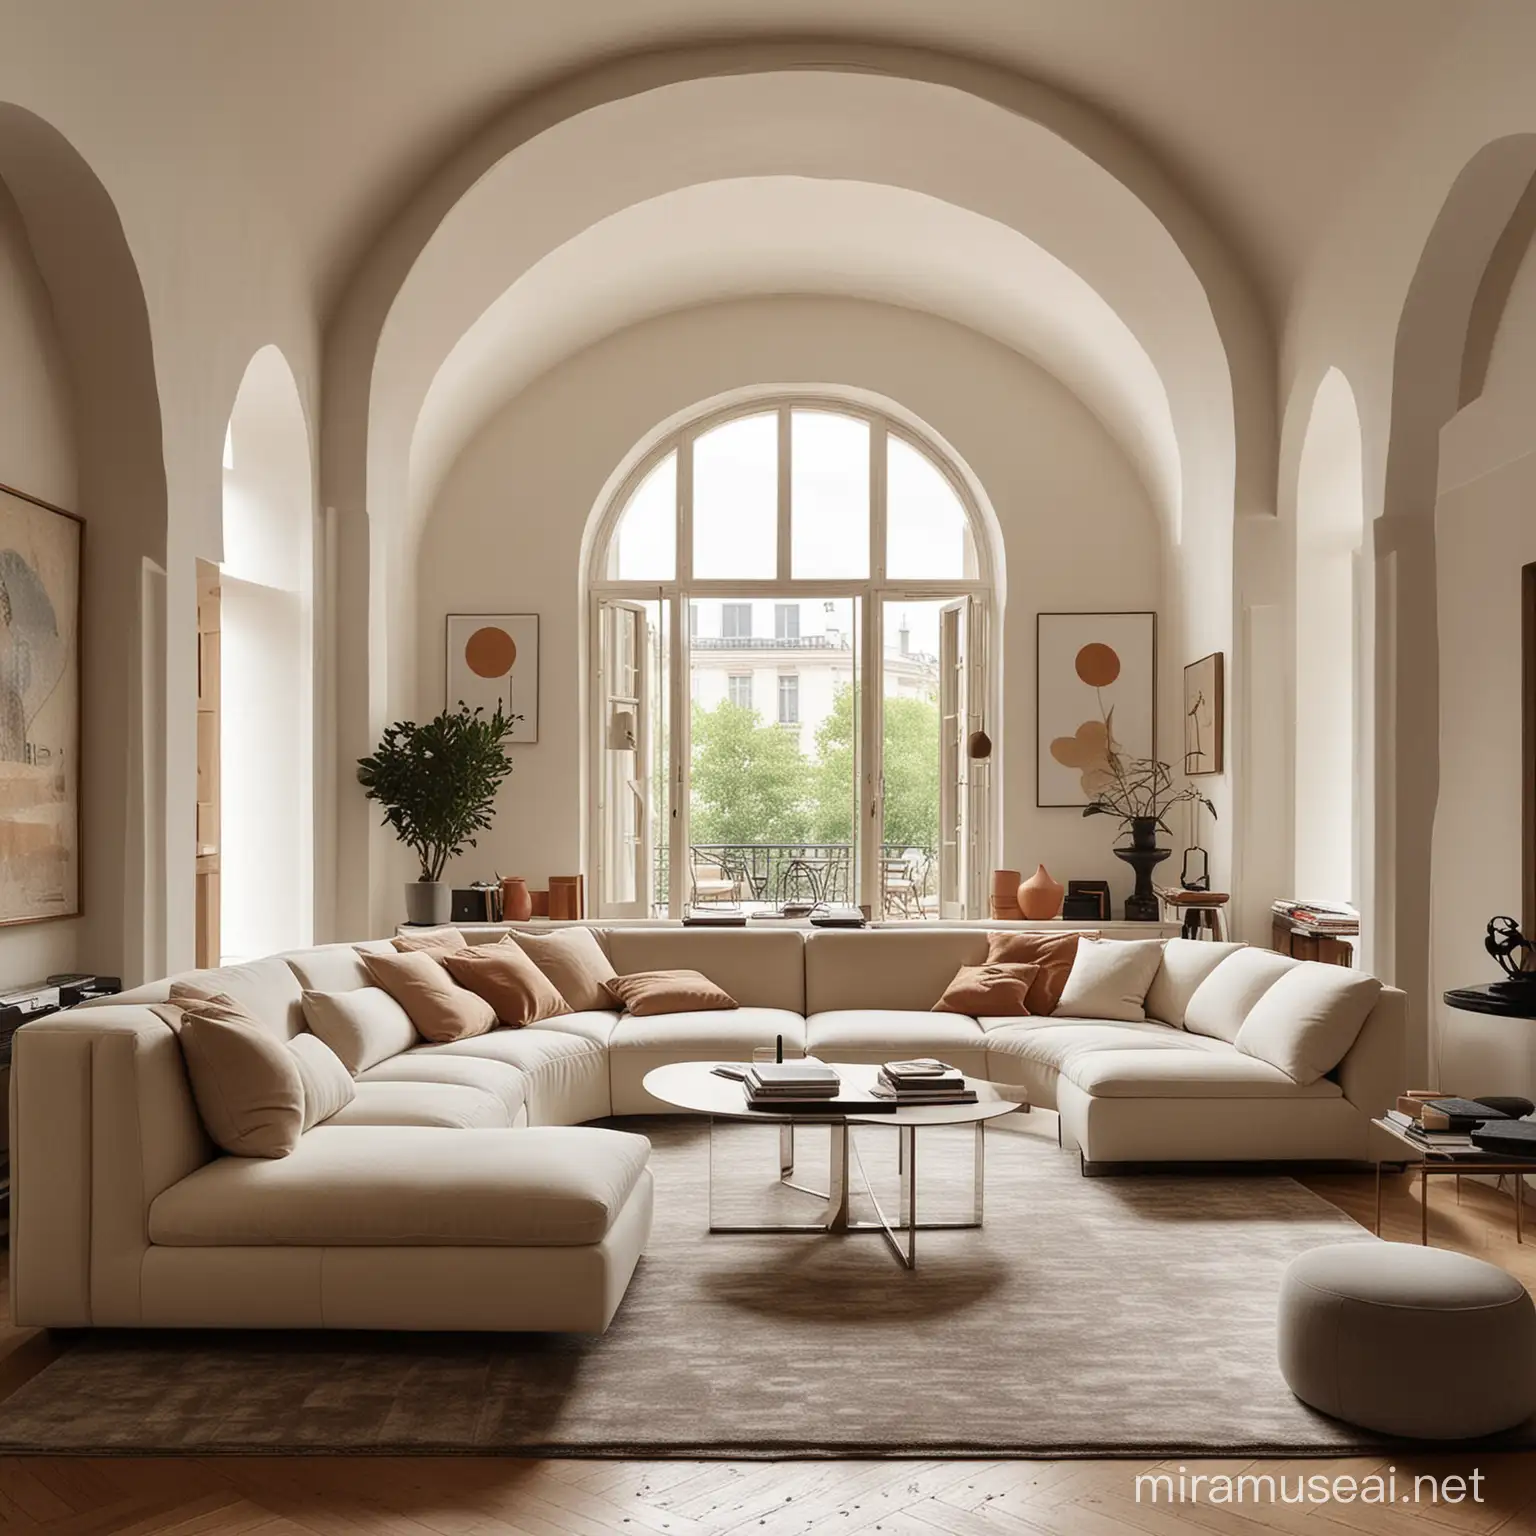 Contemporary Interior Design with Vladimir Kagan Sofa Set and Architectural Accents